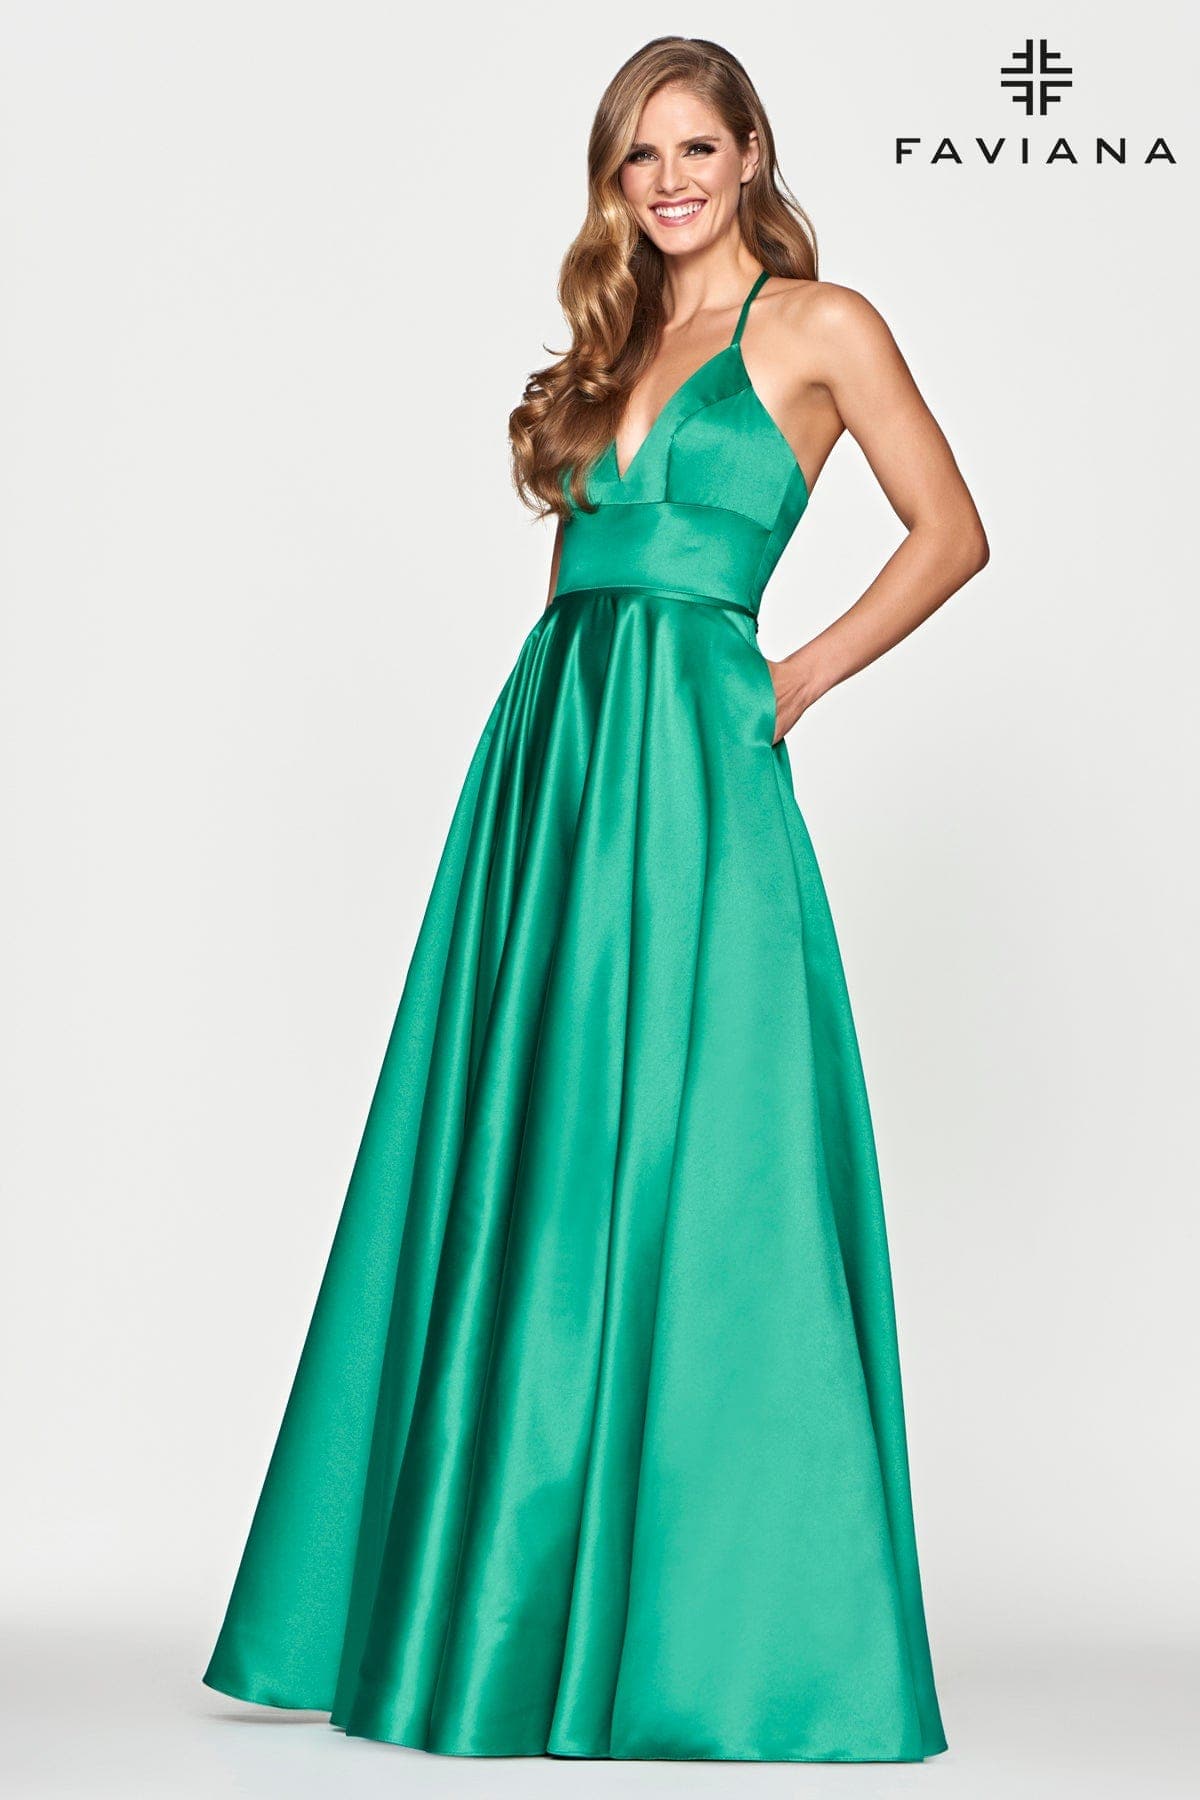 Jade Green Satin Ballgown Dress With Lace Up Back And V Neck